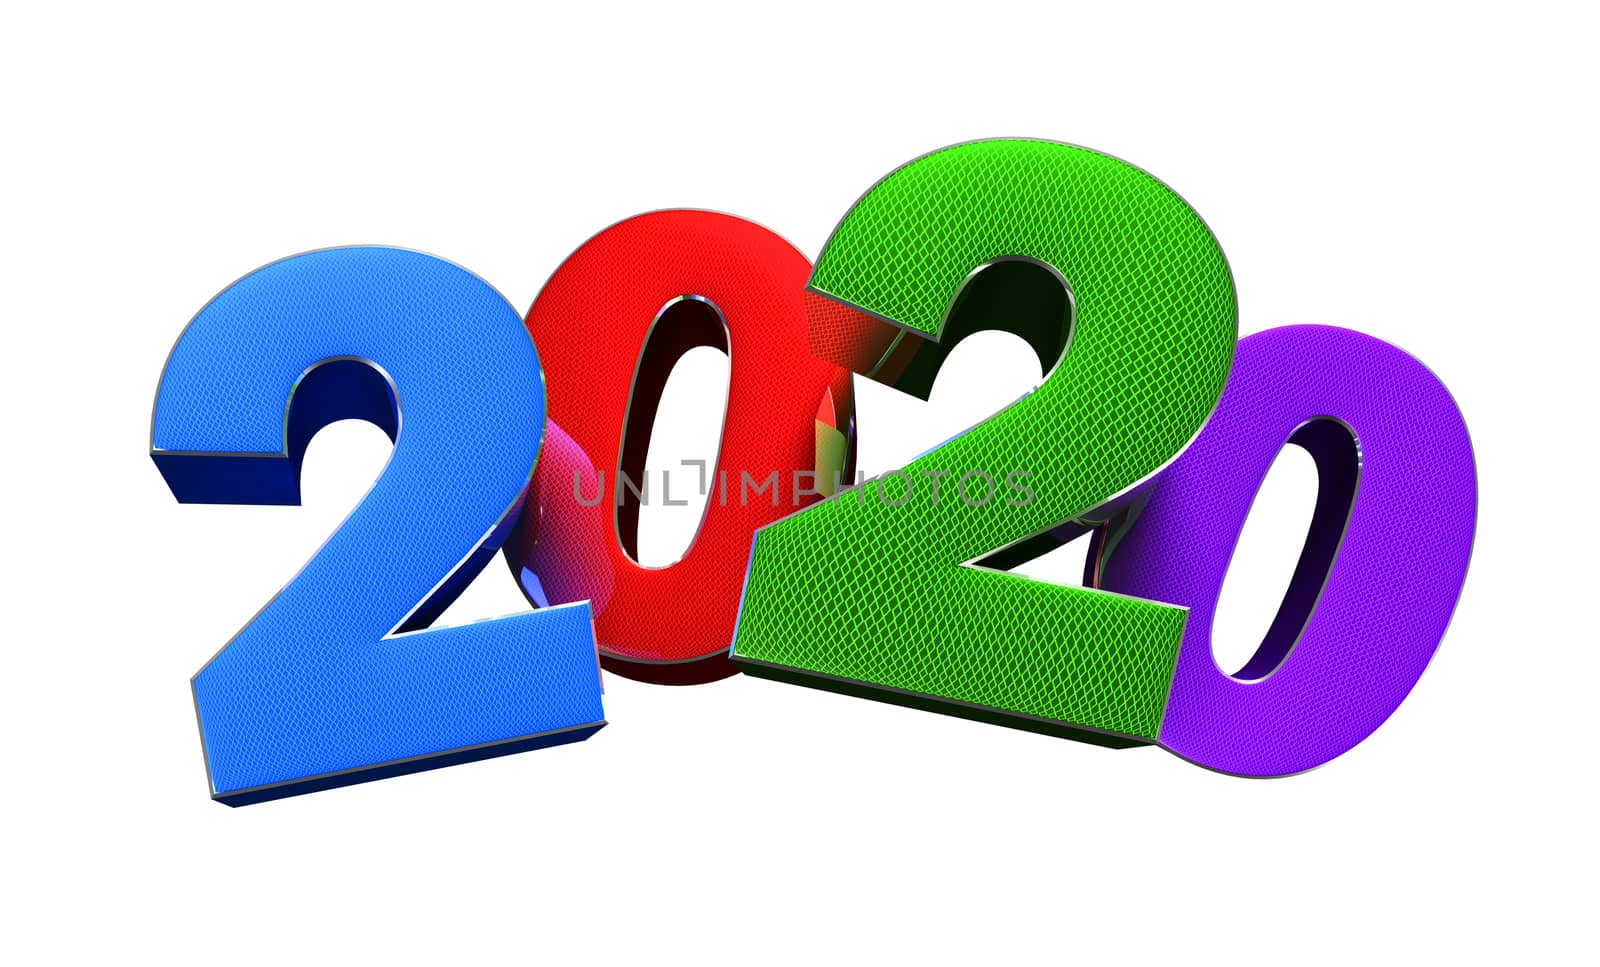 Year 2020 3D rendering on white background.